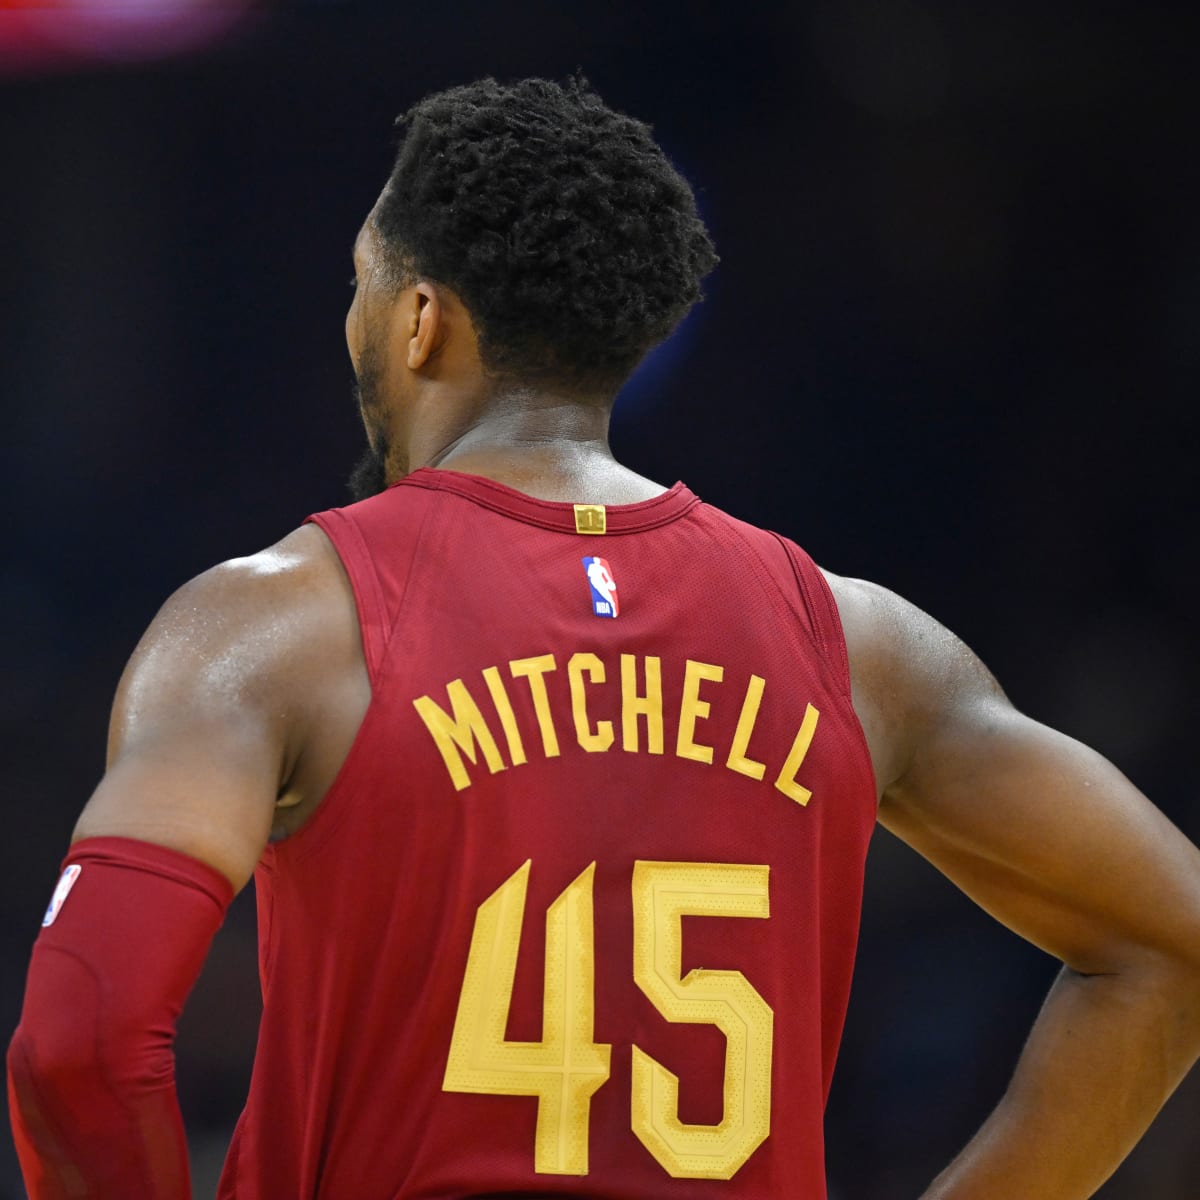 Cavs: Donovan Mitchell's eye-popping playoff feat never before done